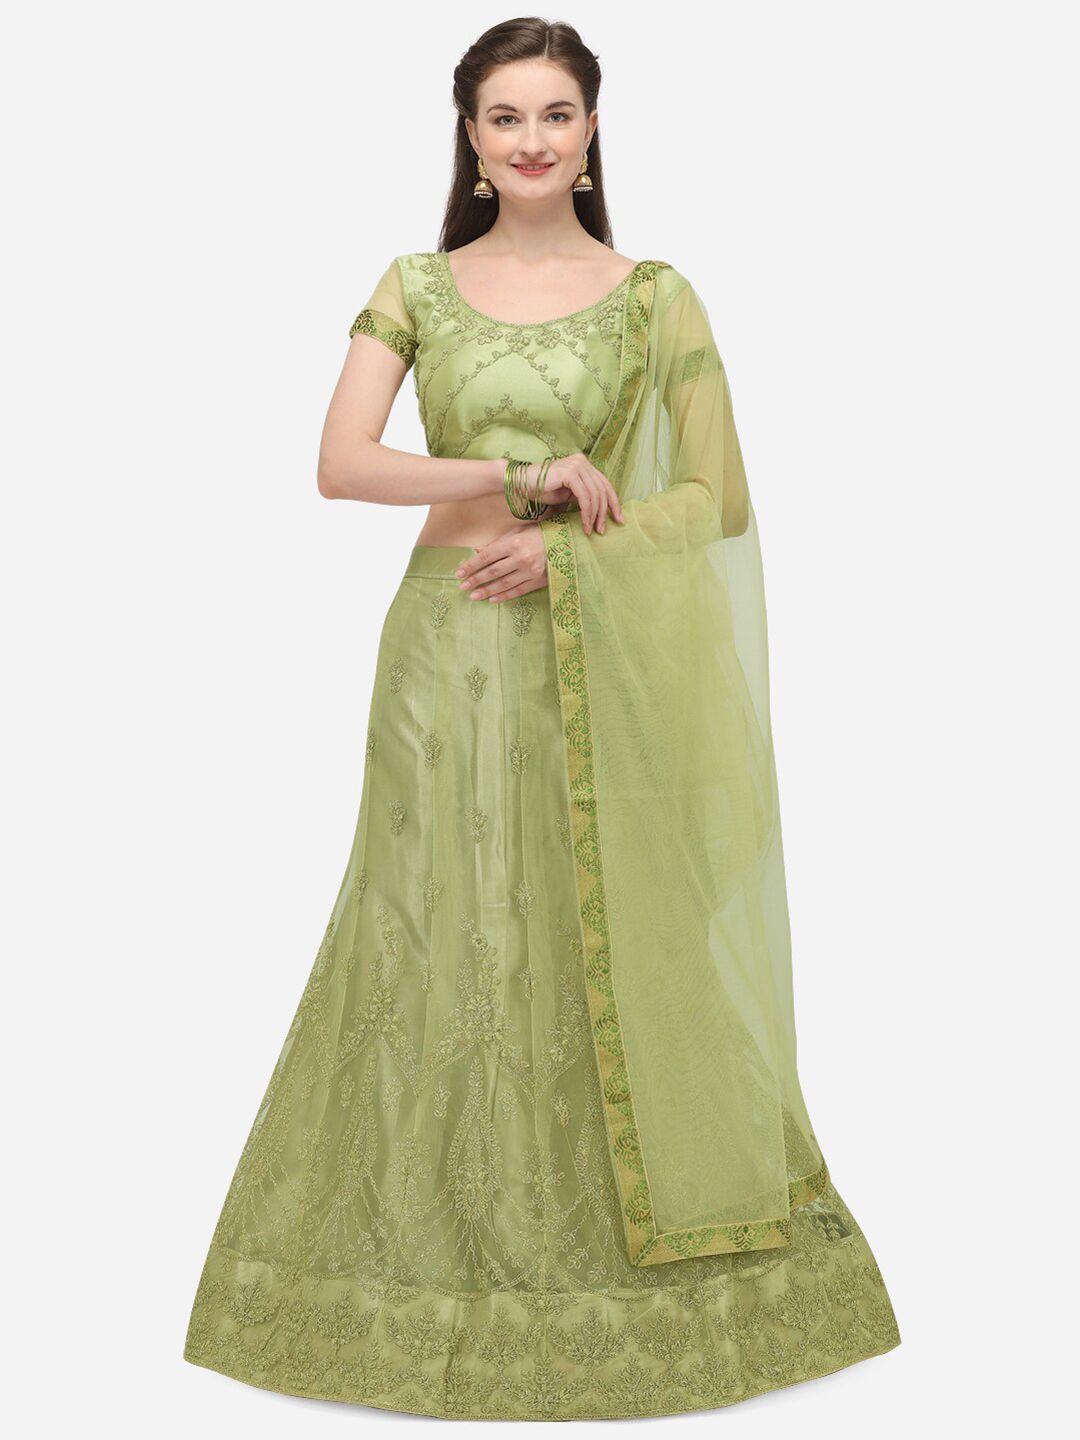 Netram Lime Green & Silver-Toned Embroidered Semi-Stitched Lehenga & Unstitched Blouse With Dupatta Price in India